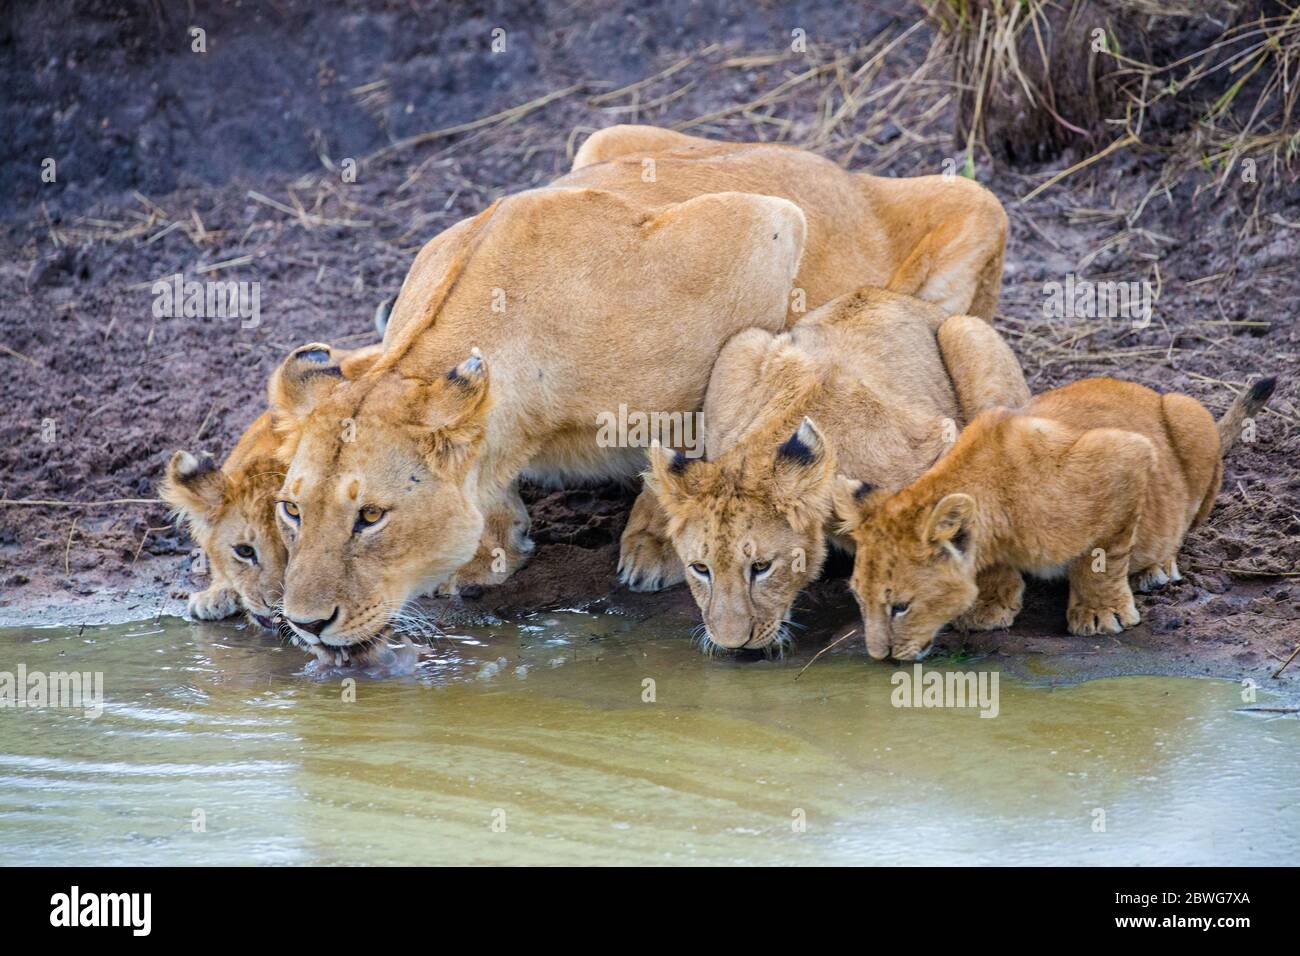 Lion (Panthera leo) family crouch down and drinking water, Serengeti National Park, Tanzania, Africa Stock Photo